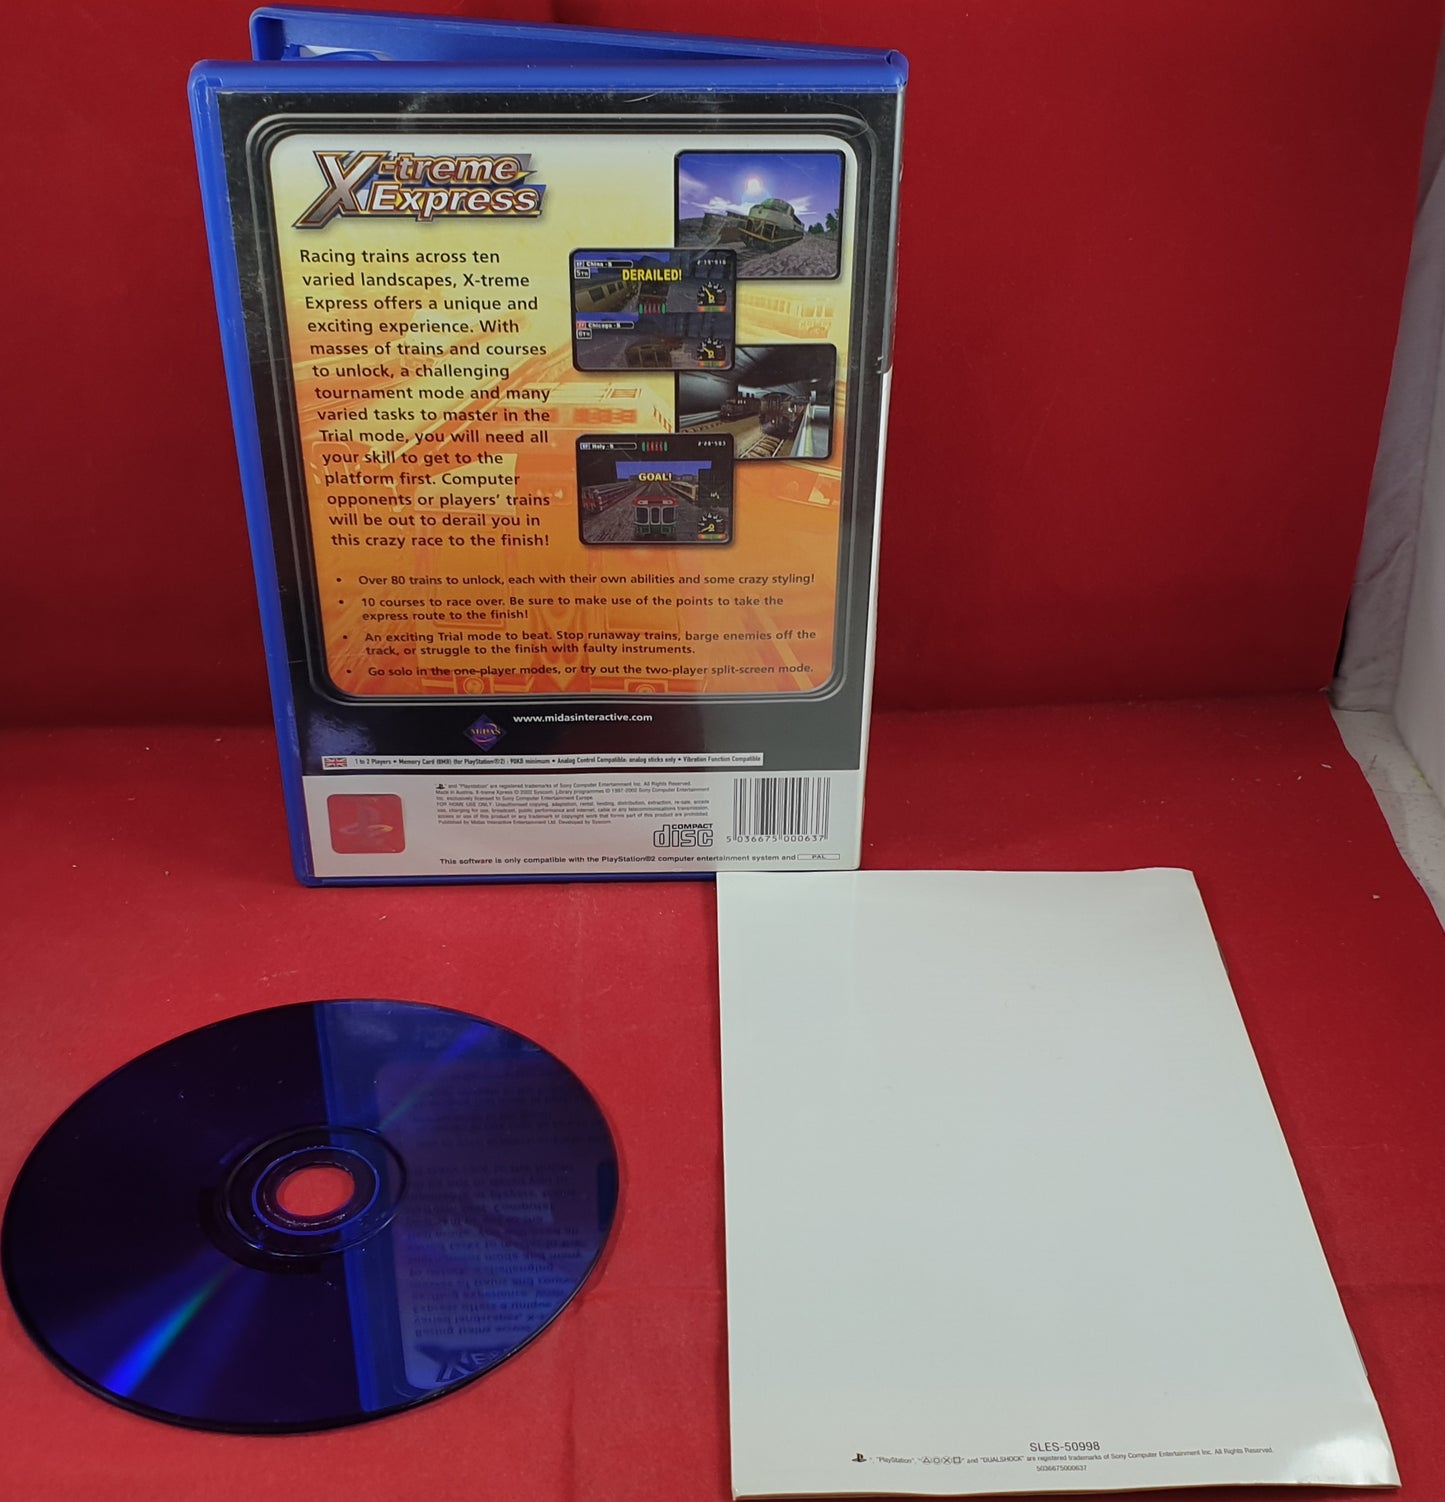 Xtreme Express World Grand Prix Sony Playstation 2 (PS2) Game